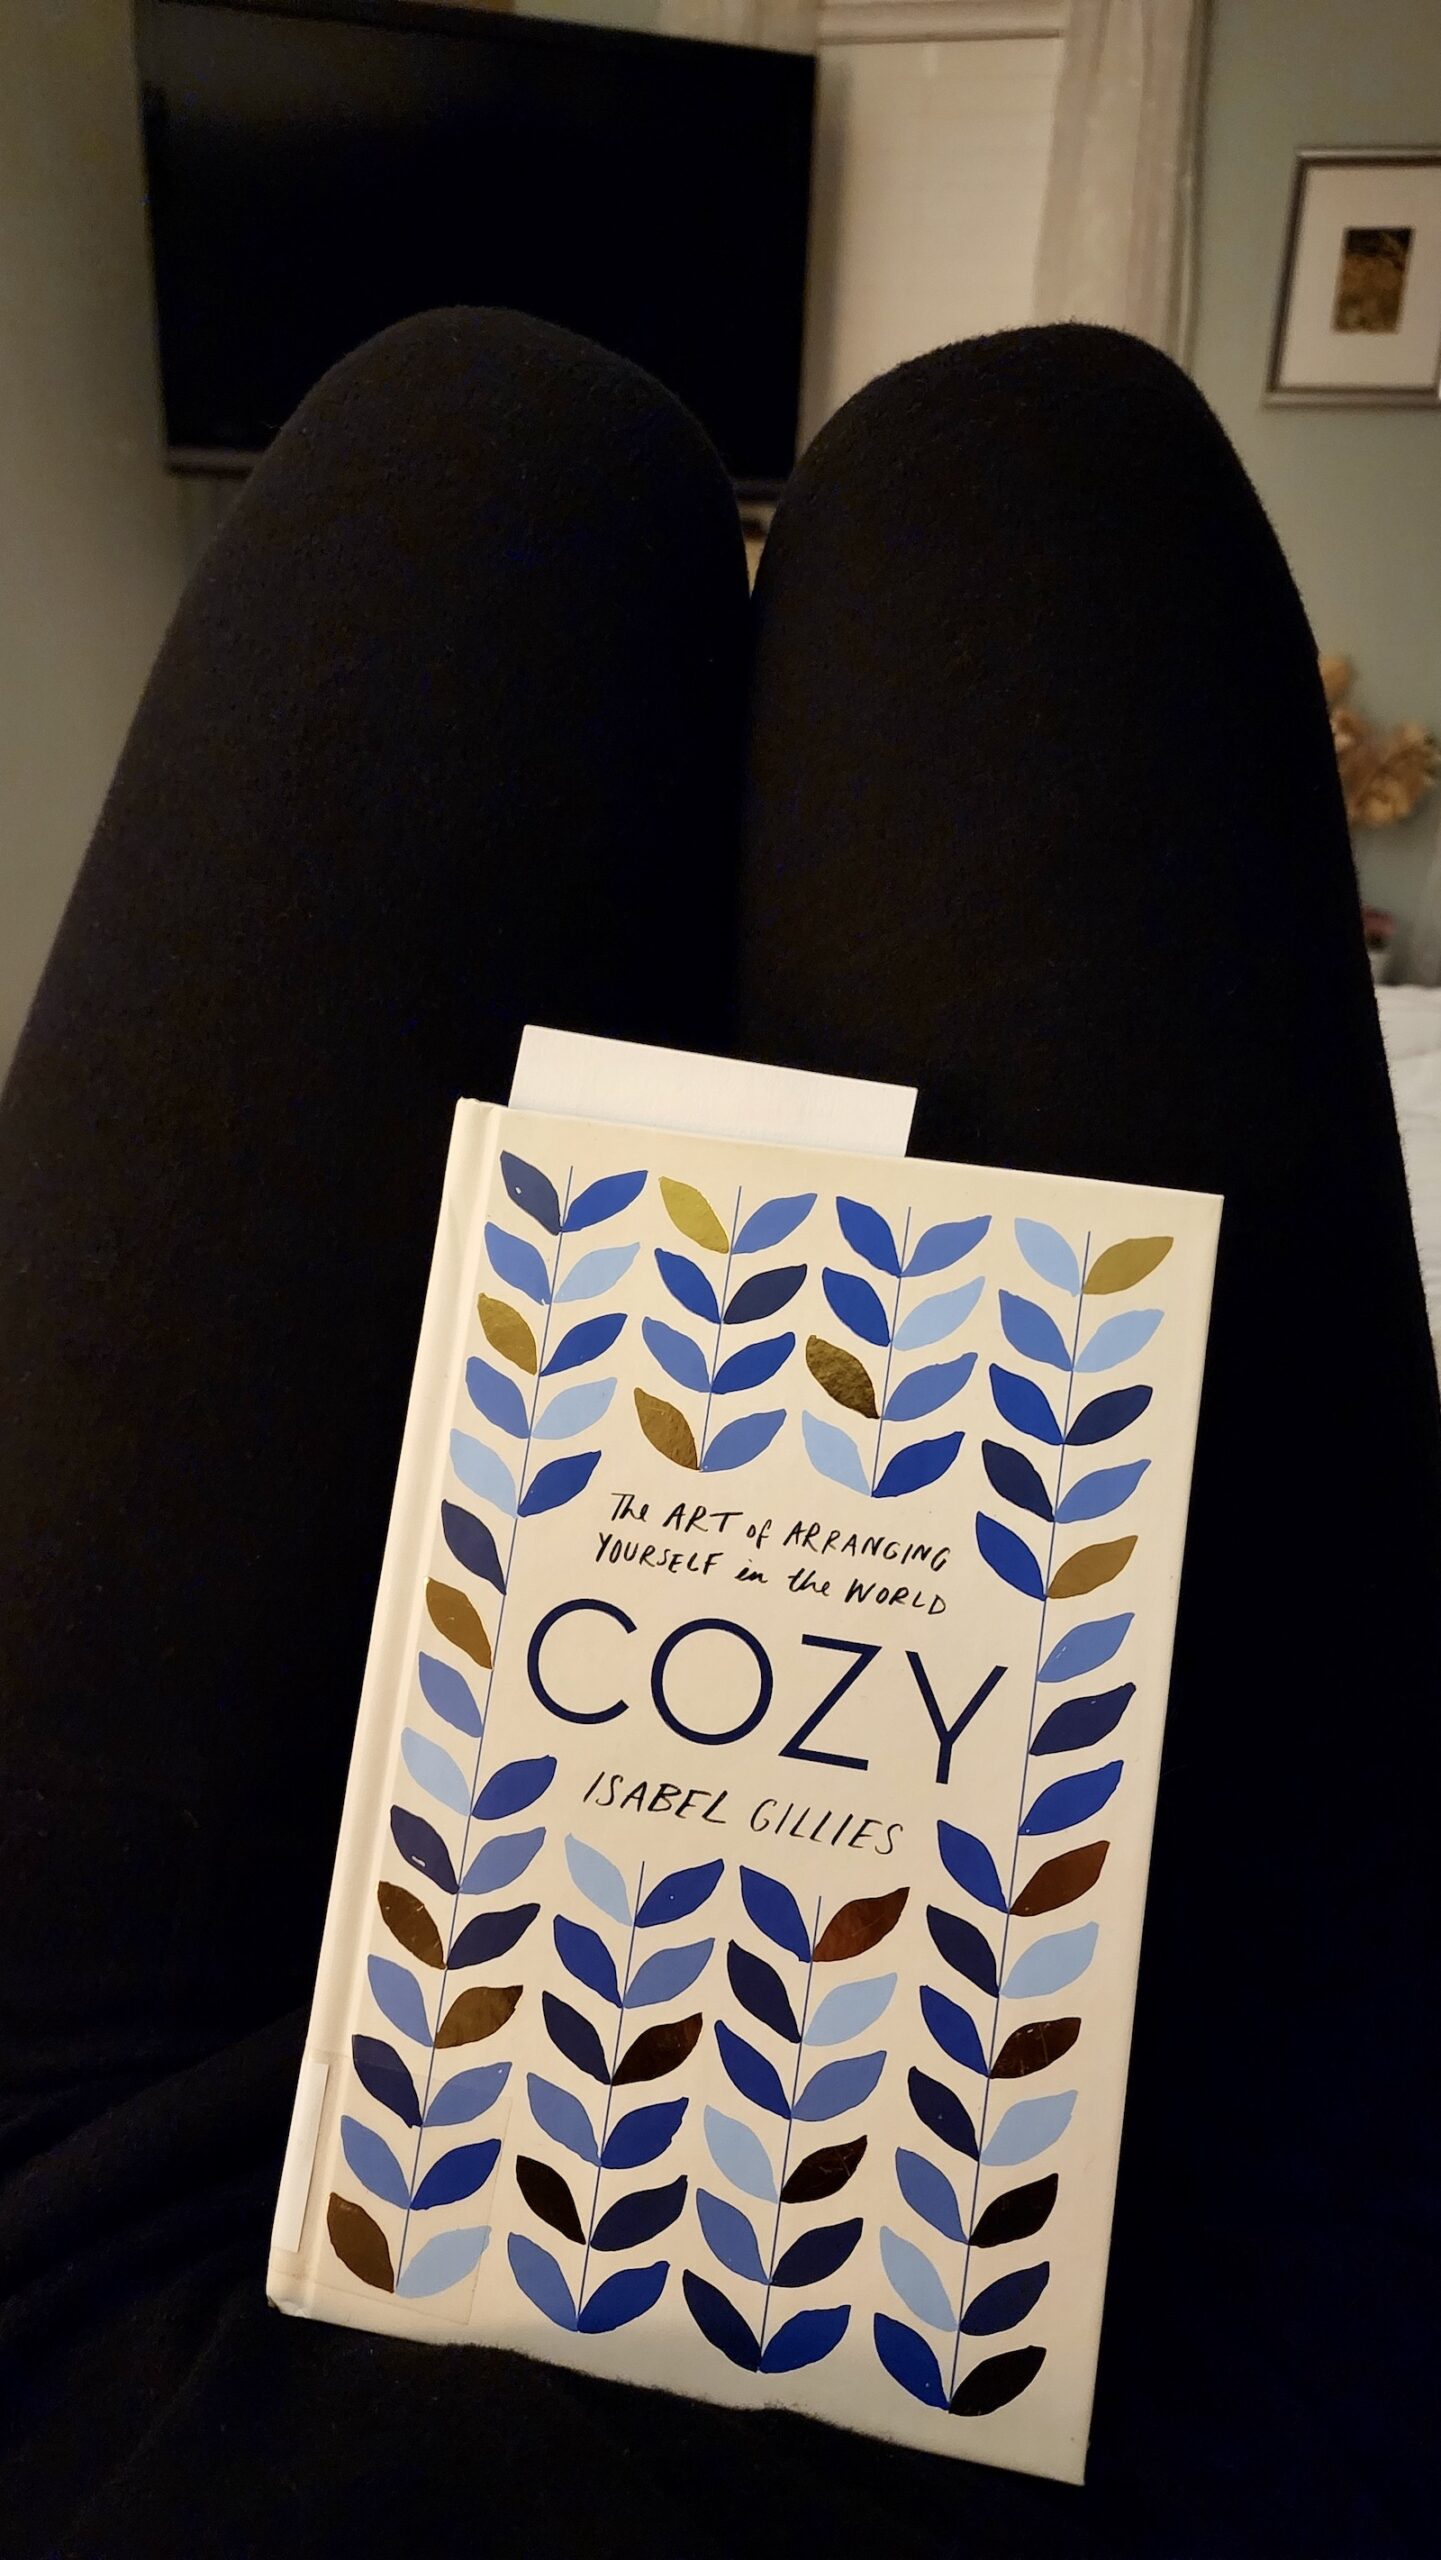 Creating a “Cozy” Home and Life By Changing Your Thoughts